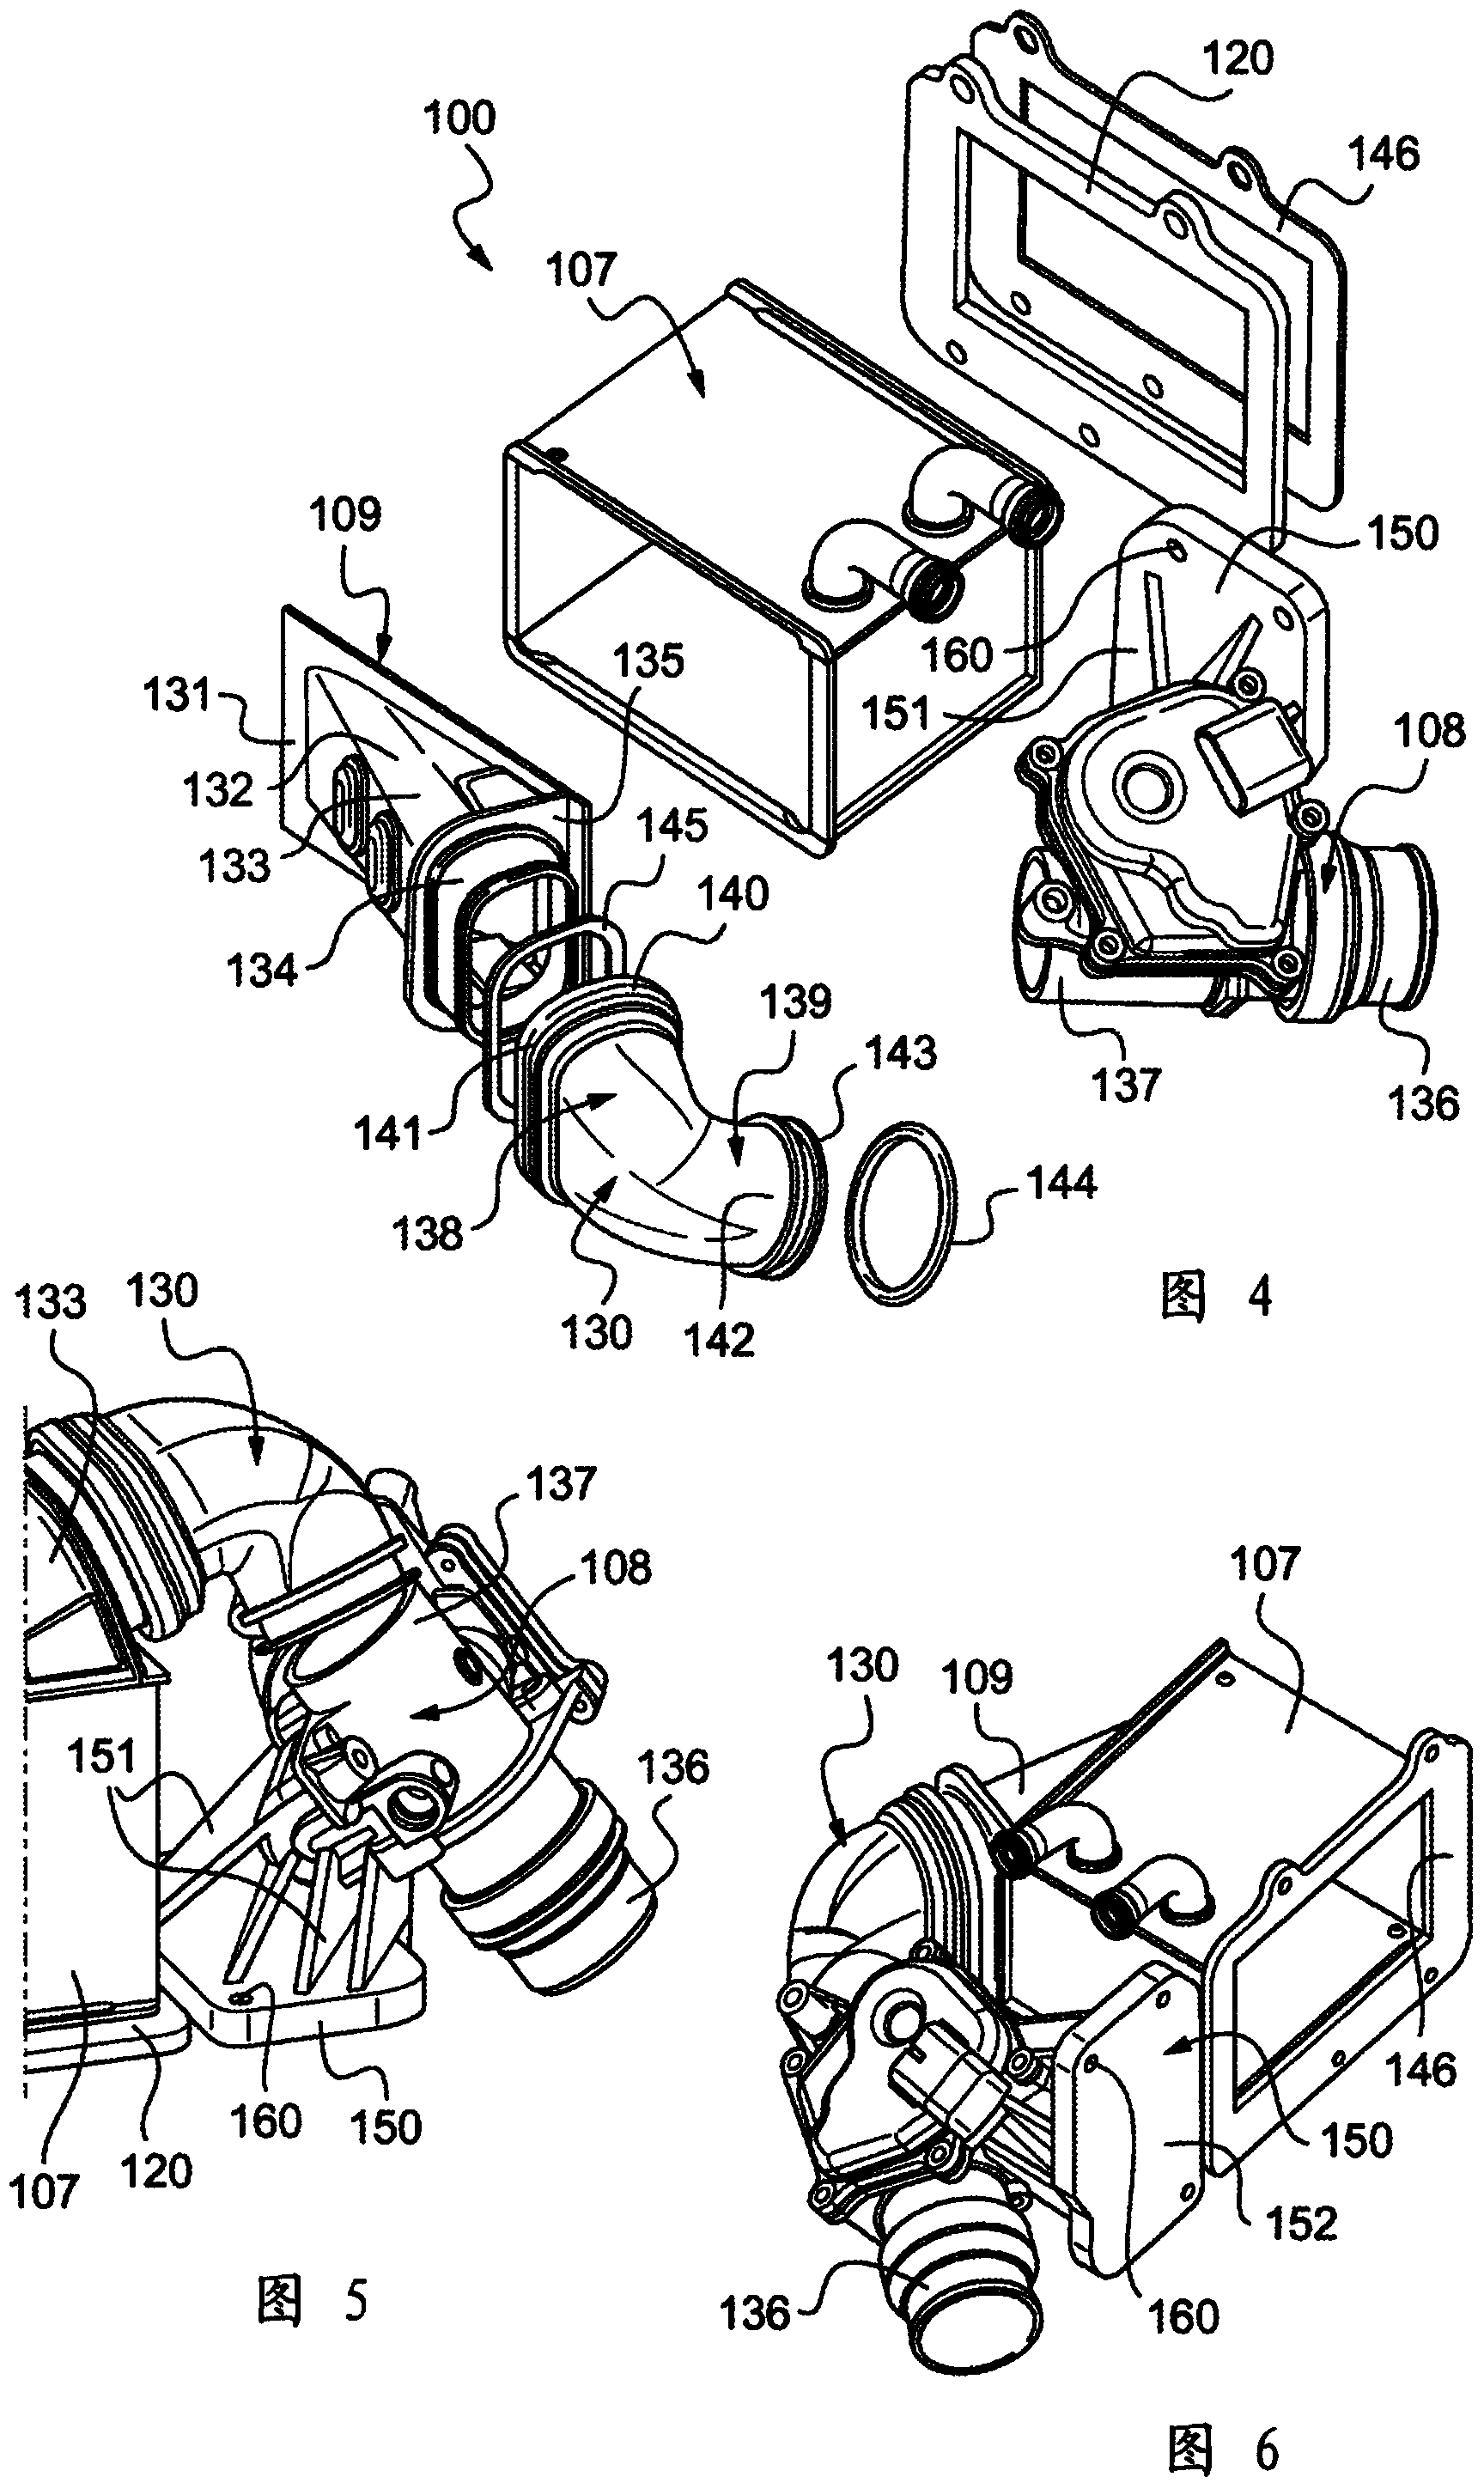 Module for supplying gas to a motor vehicle engine